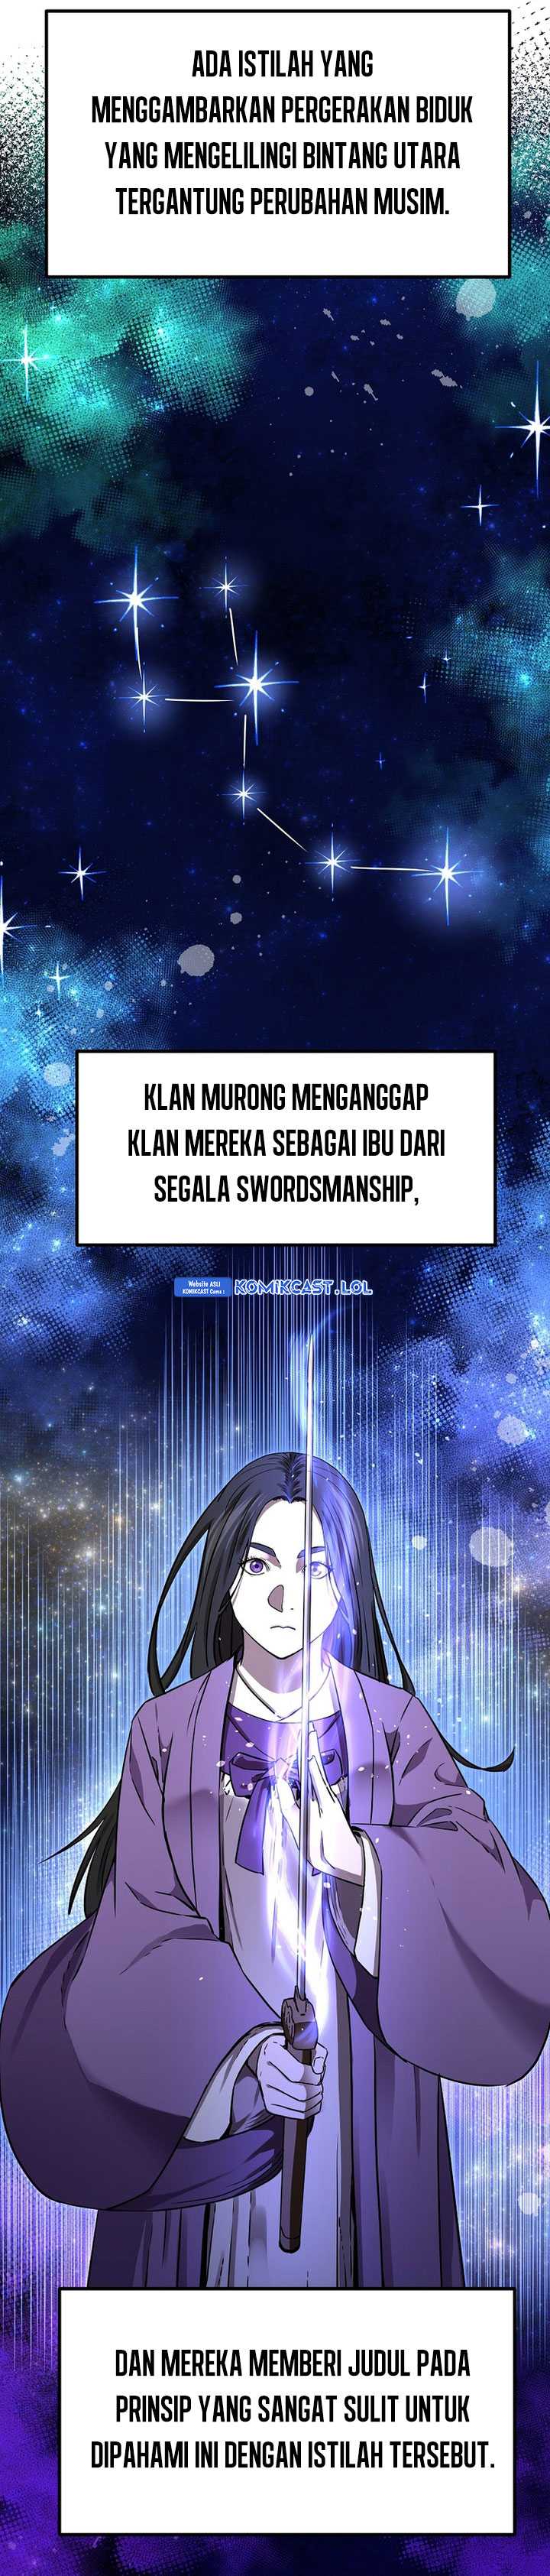 Reincarnation of the Murim Clan’s Former Ranker Chapter 115